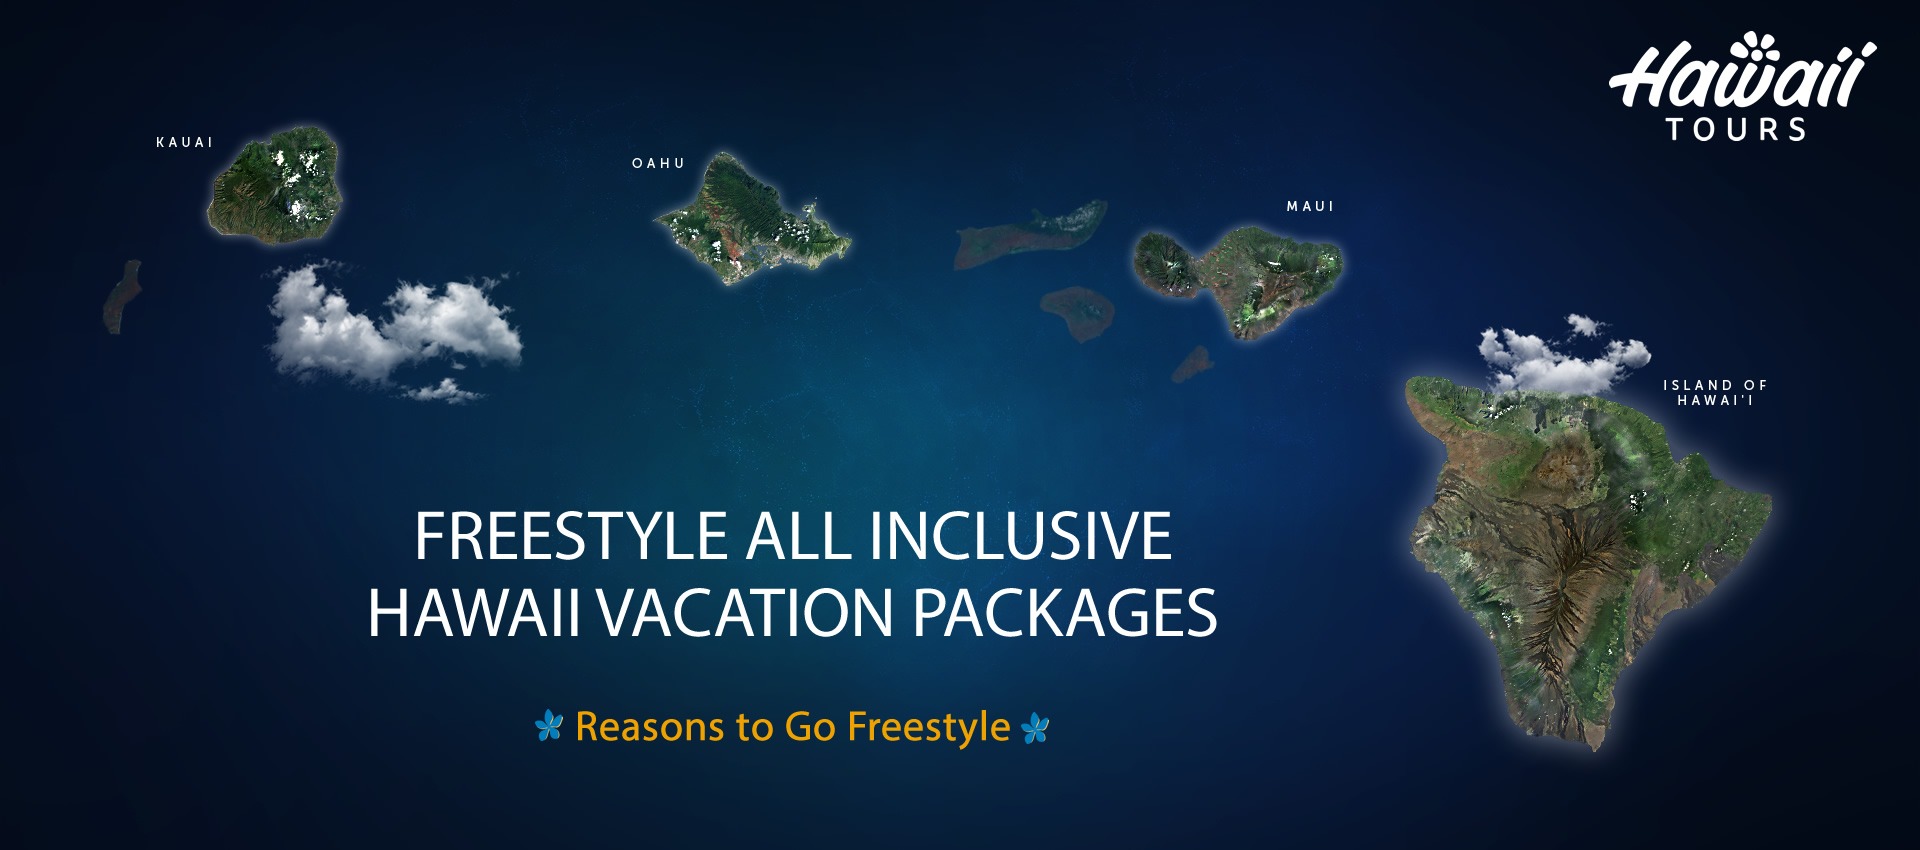 All Inclusive Hawaii Vacation Packages | Hawaii Tours & Activities